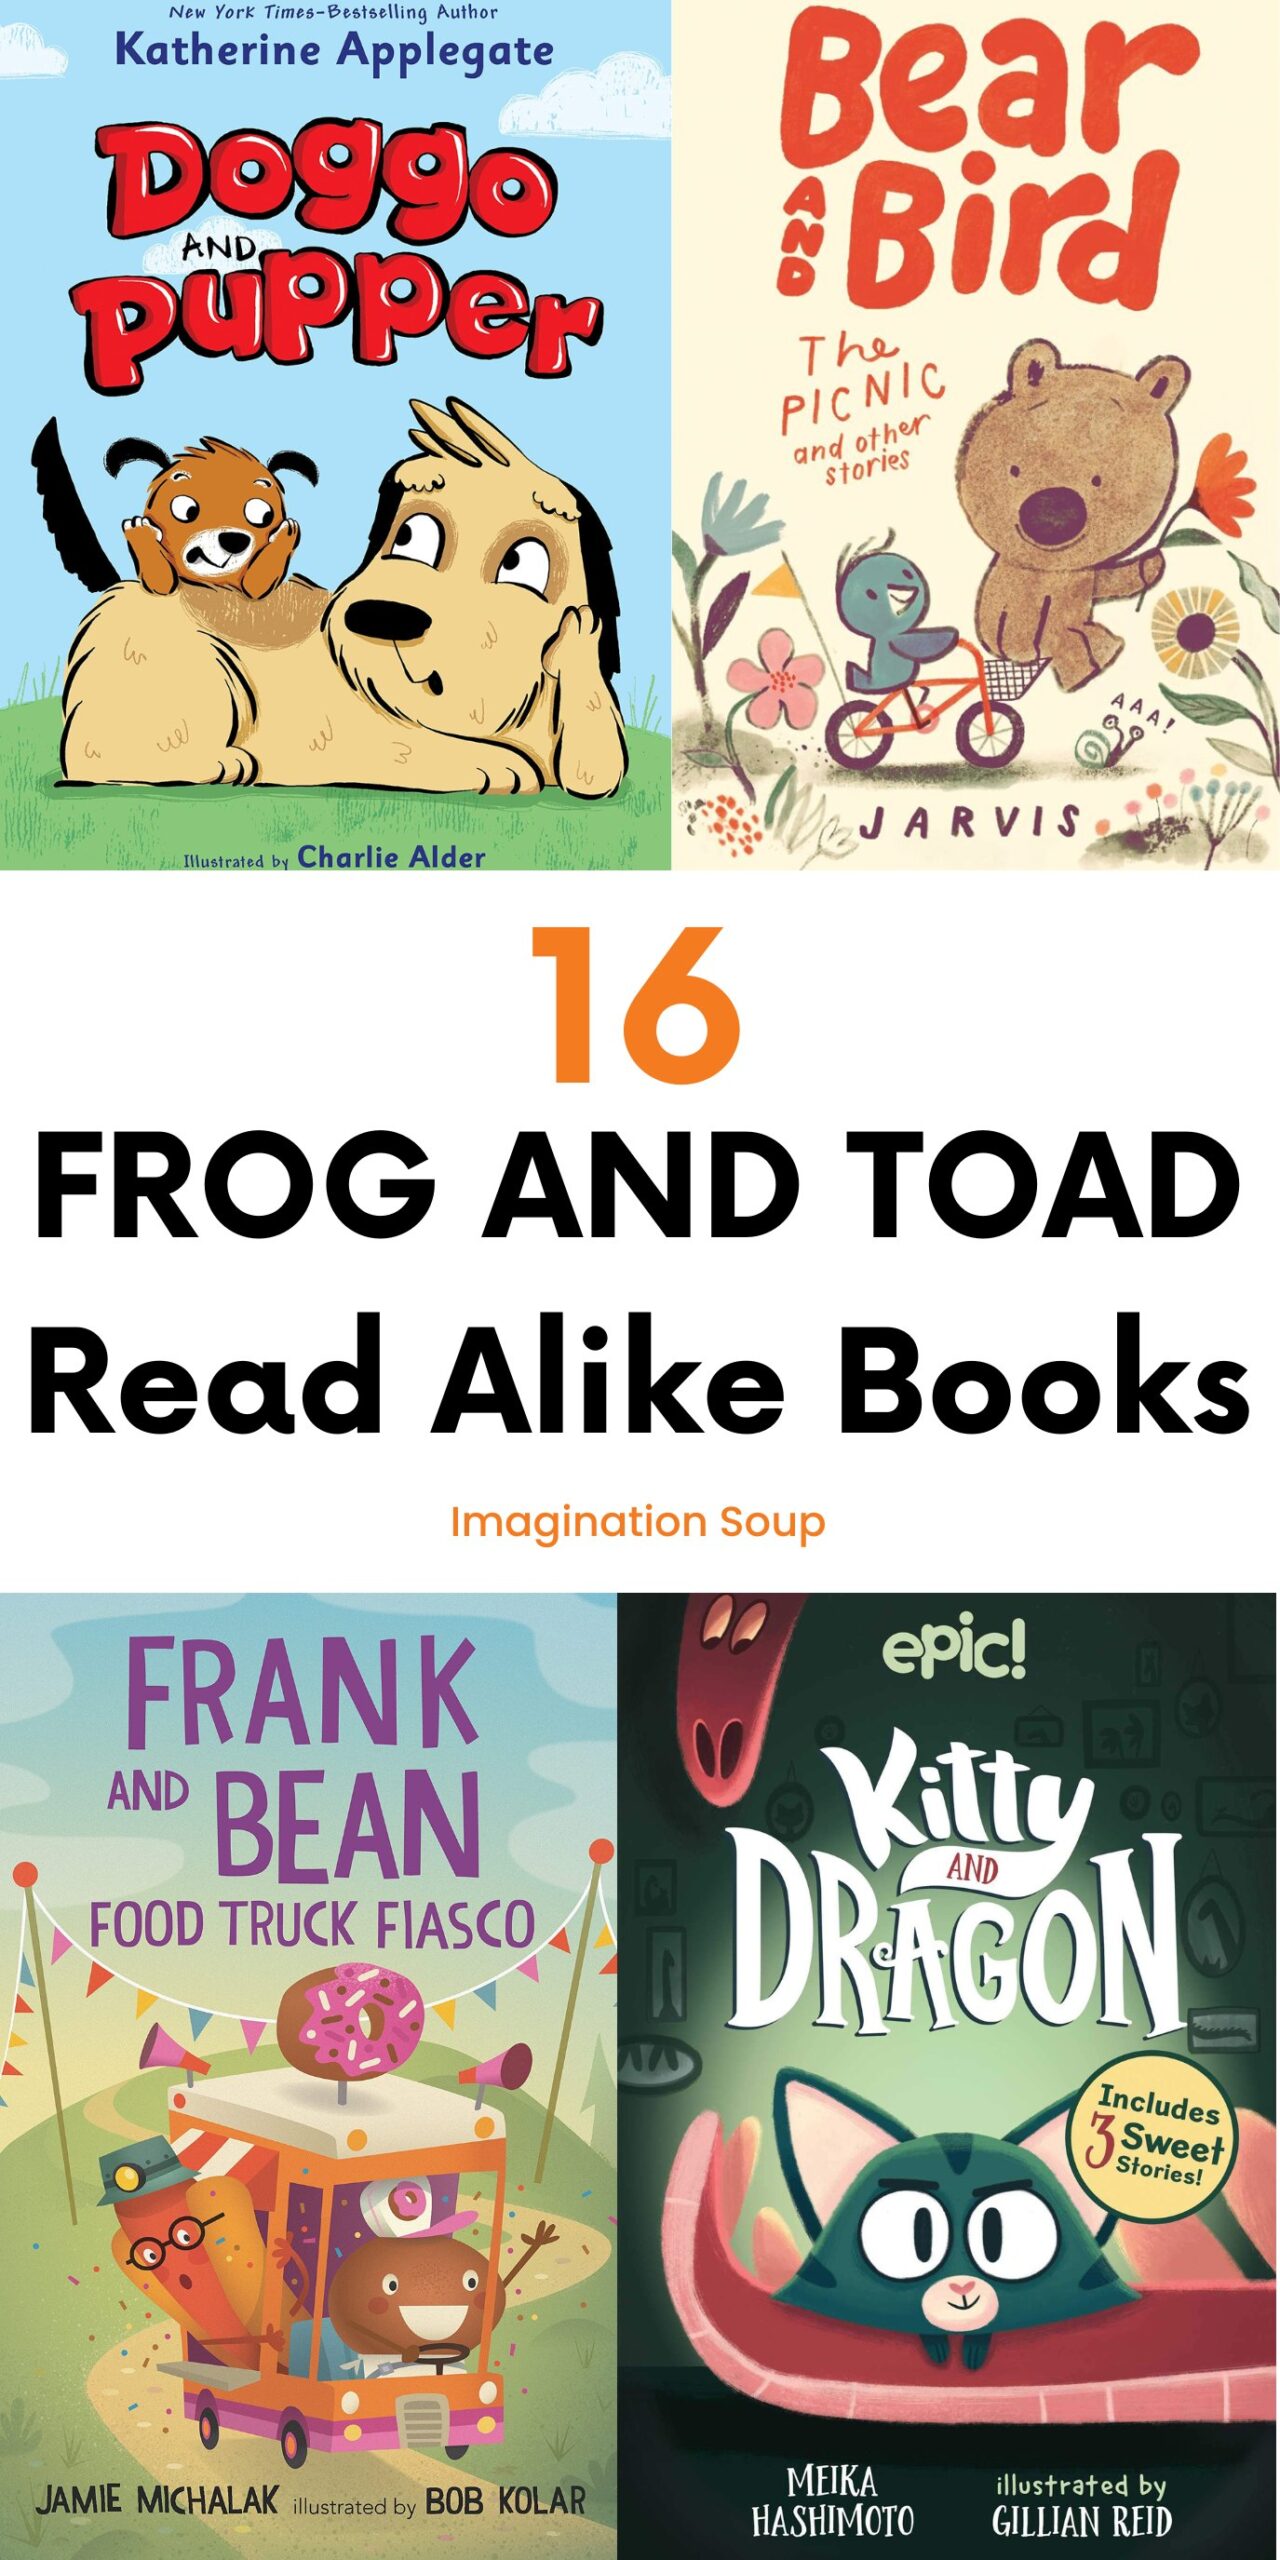 If you've been reading Frog and Toad books and looking for more contemporary friendship adventures for early readers, I've got you covered with a list of charming read alikes.